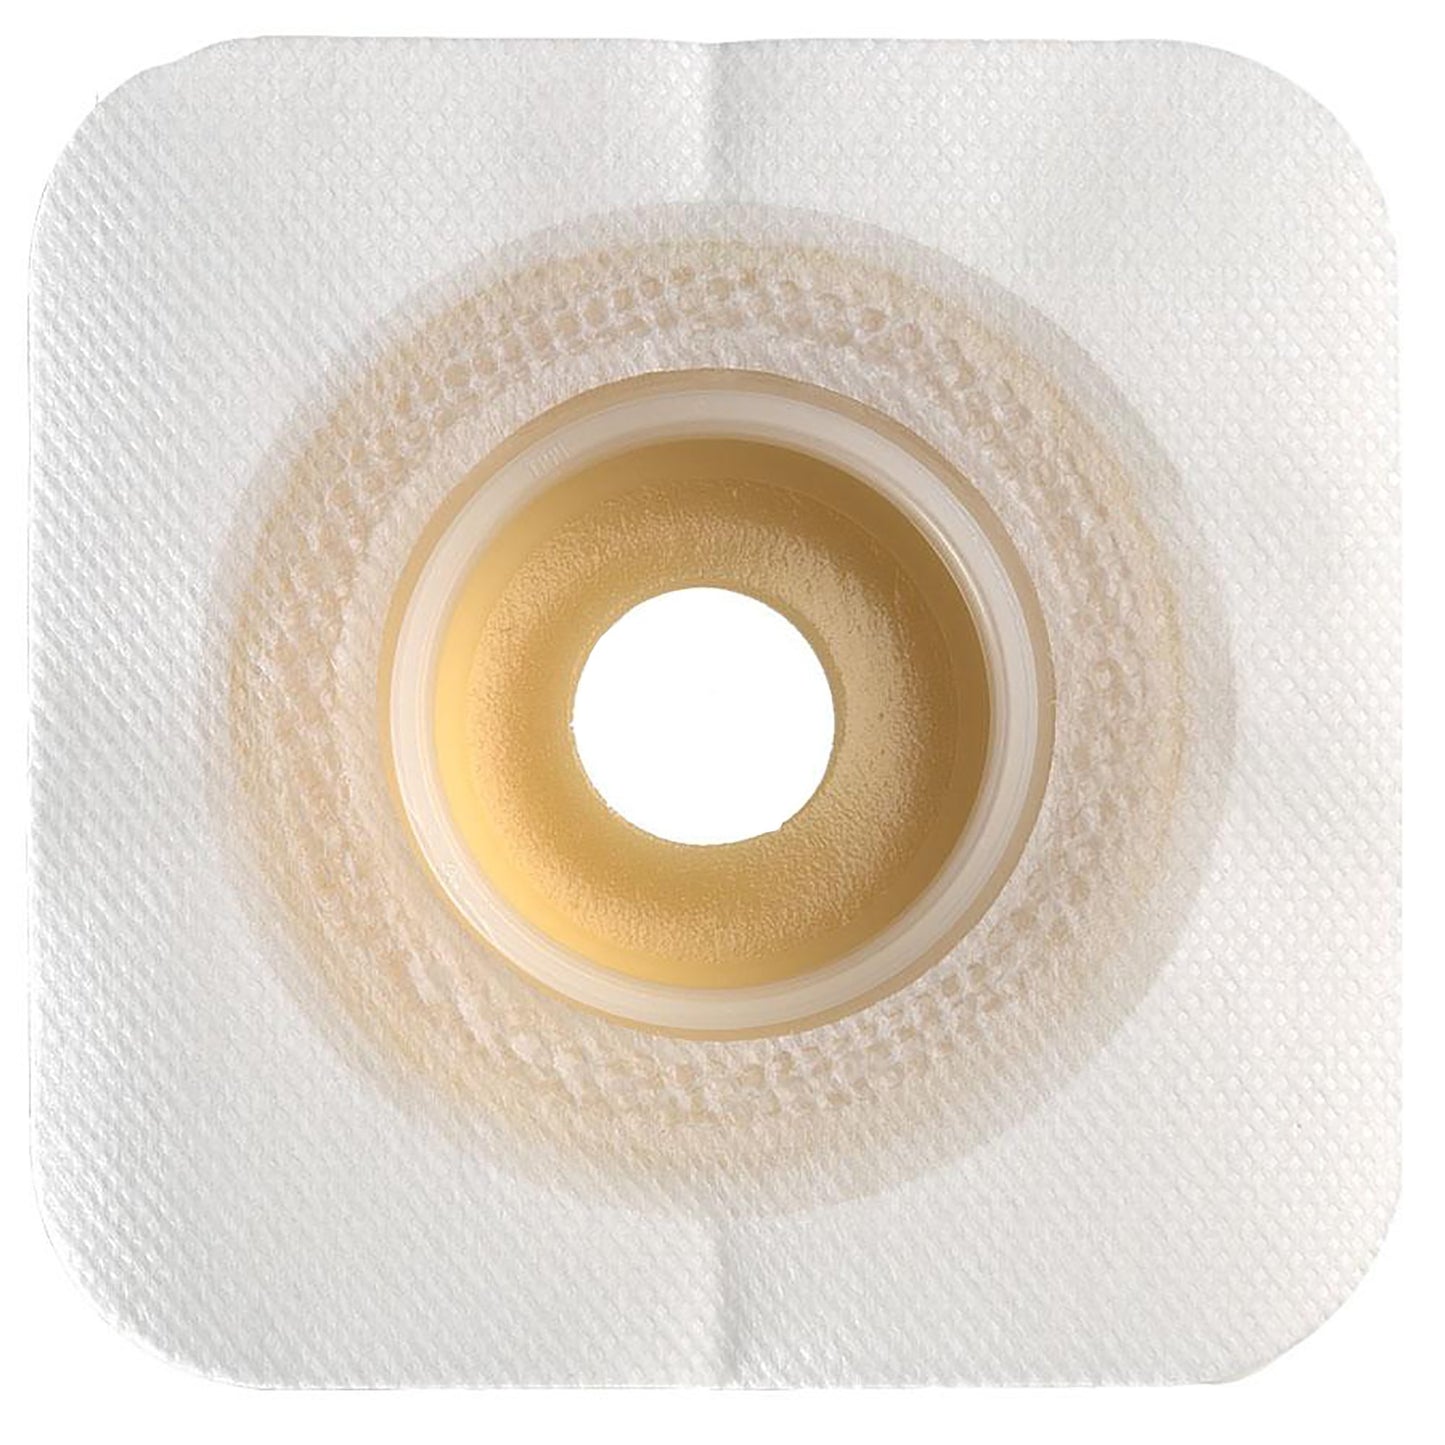 Sur-Fit Natura® Durahesive White Ostomy Barrier, 4.5 x 4.5 Inch, 2.25-Inch Flange, 1.25 – 1.75 Inch Stoma Opening